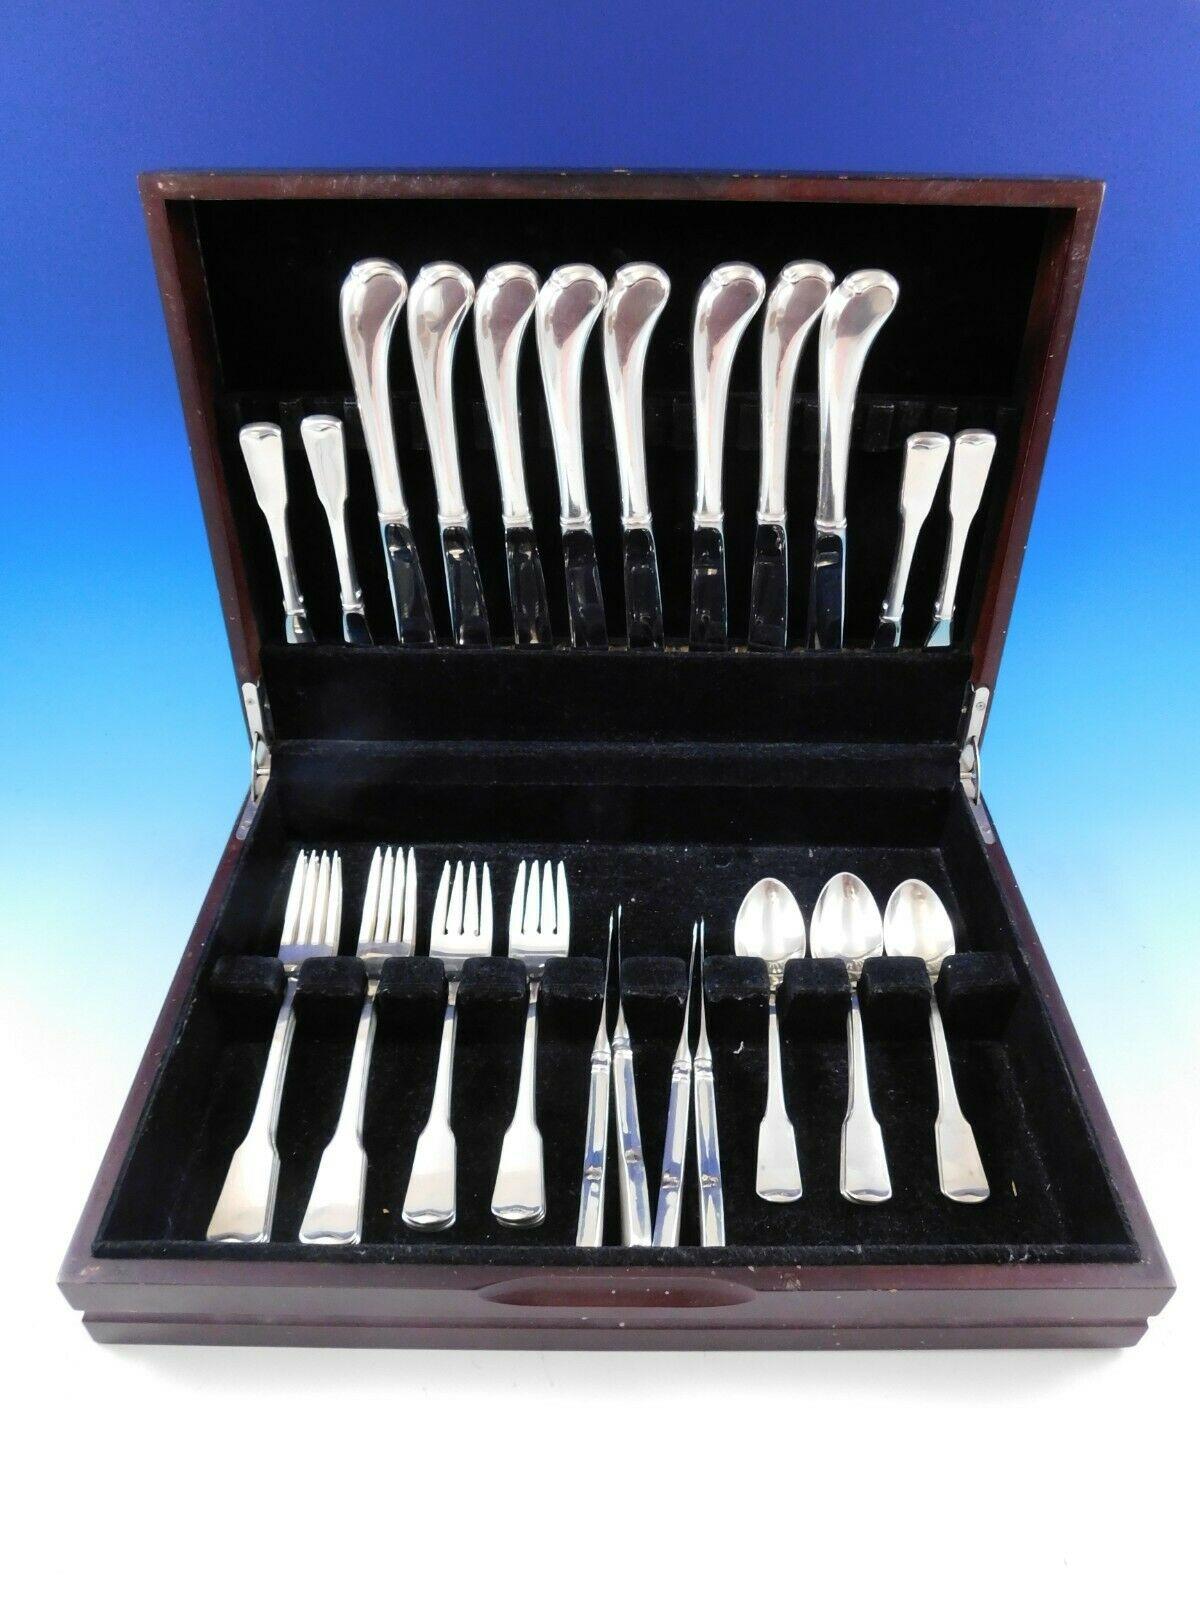 American Colonial by Oneida, circa 1975, sterling silver Flatware set, 40 pieces. This scarce pattern features a classic fiddle shape design and wonderful pistol grip knife handles. This set includes:

8 Knives, 9 1/4